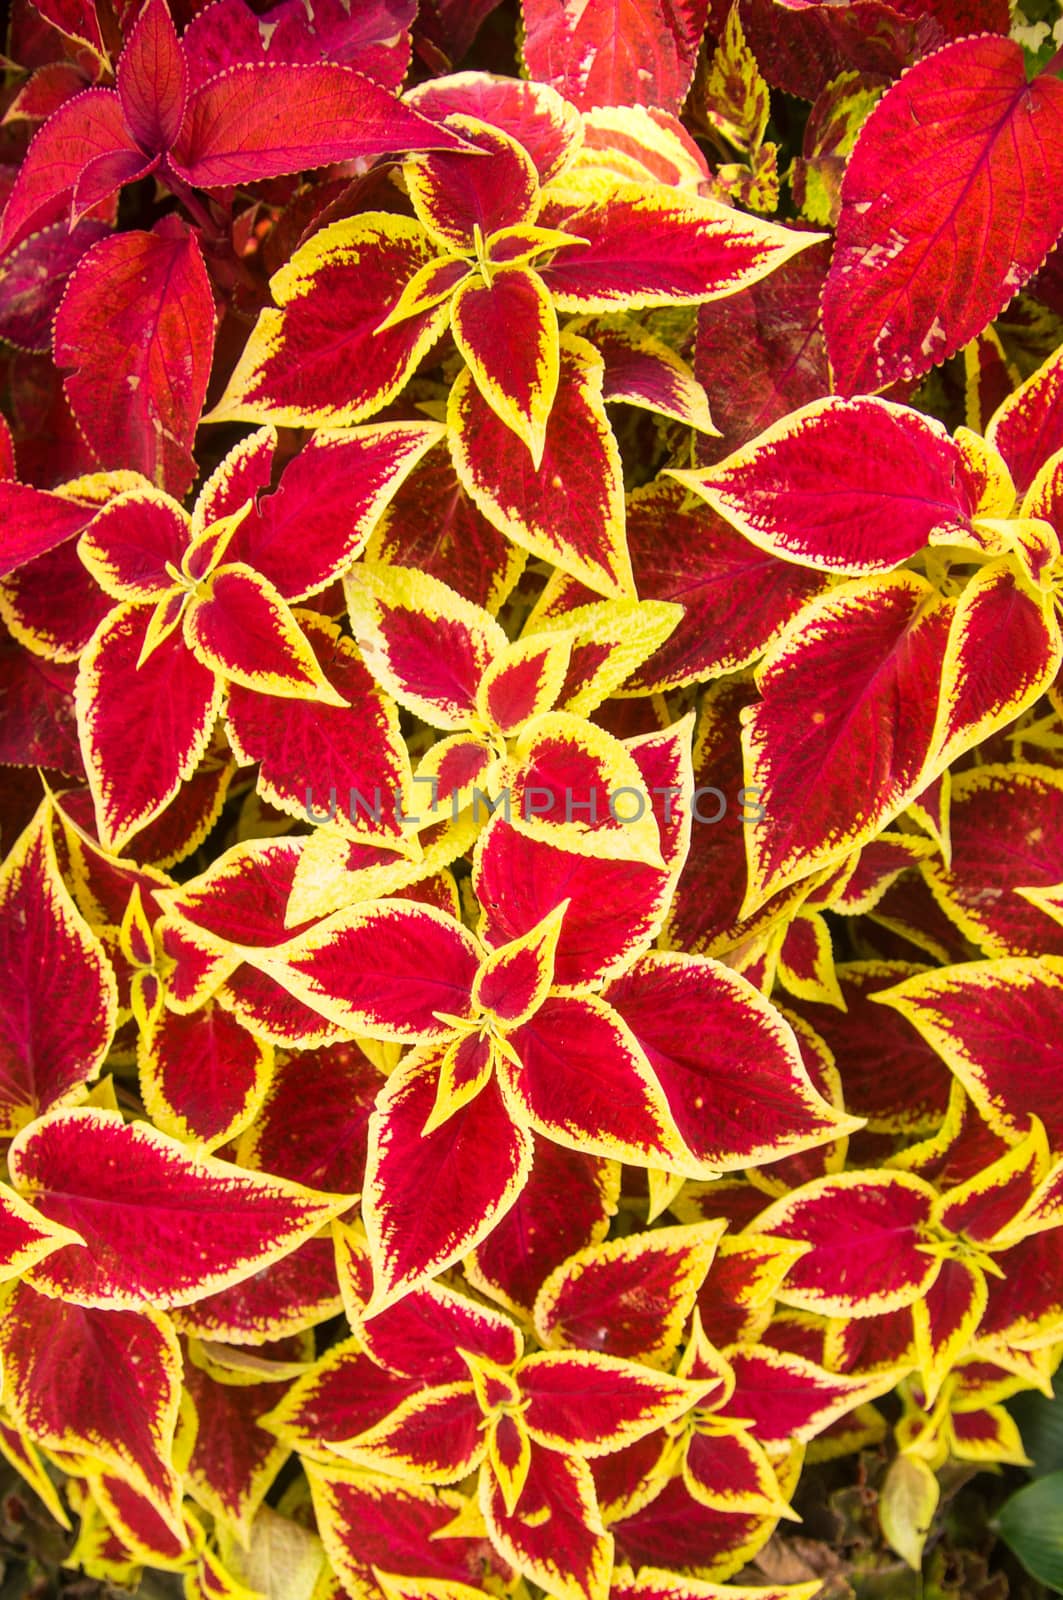 Red and yellow Poinsettias